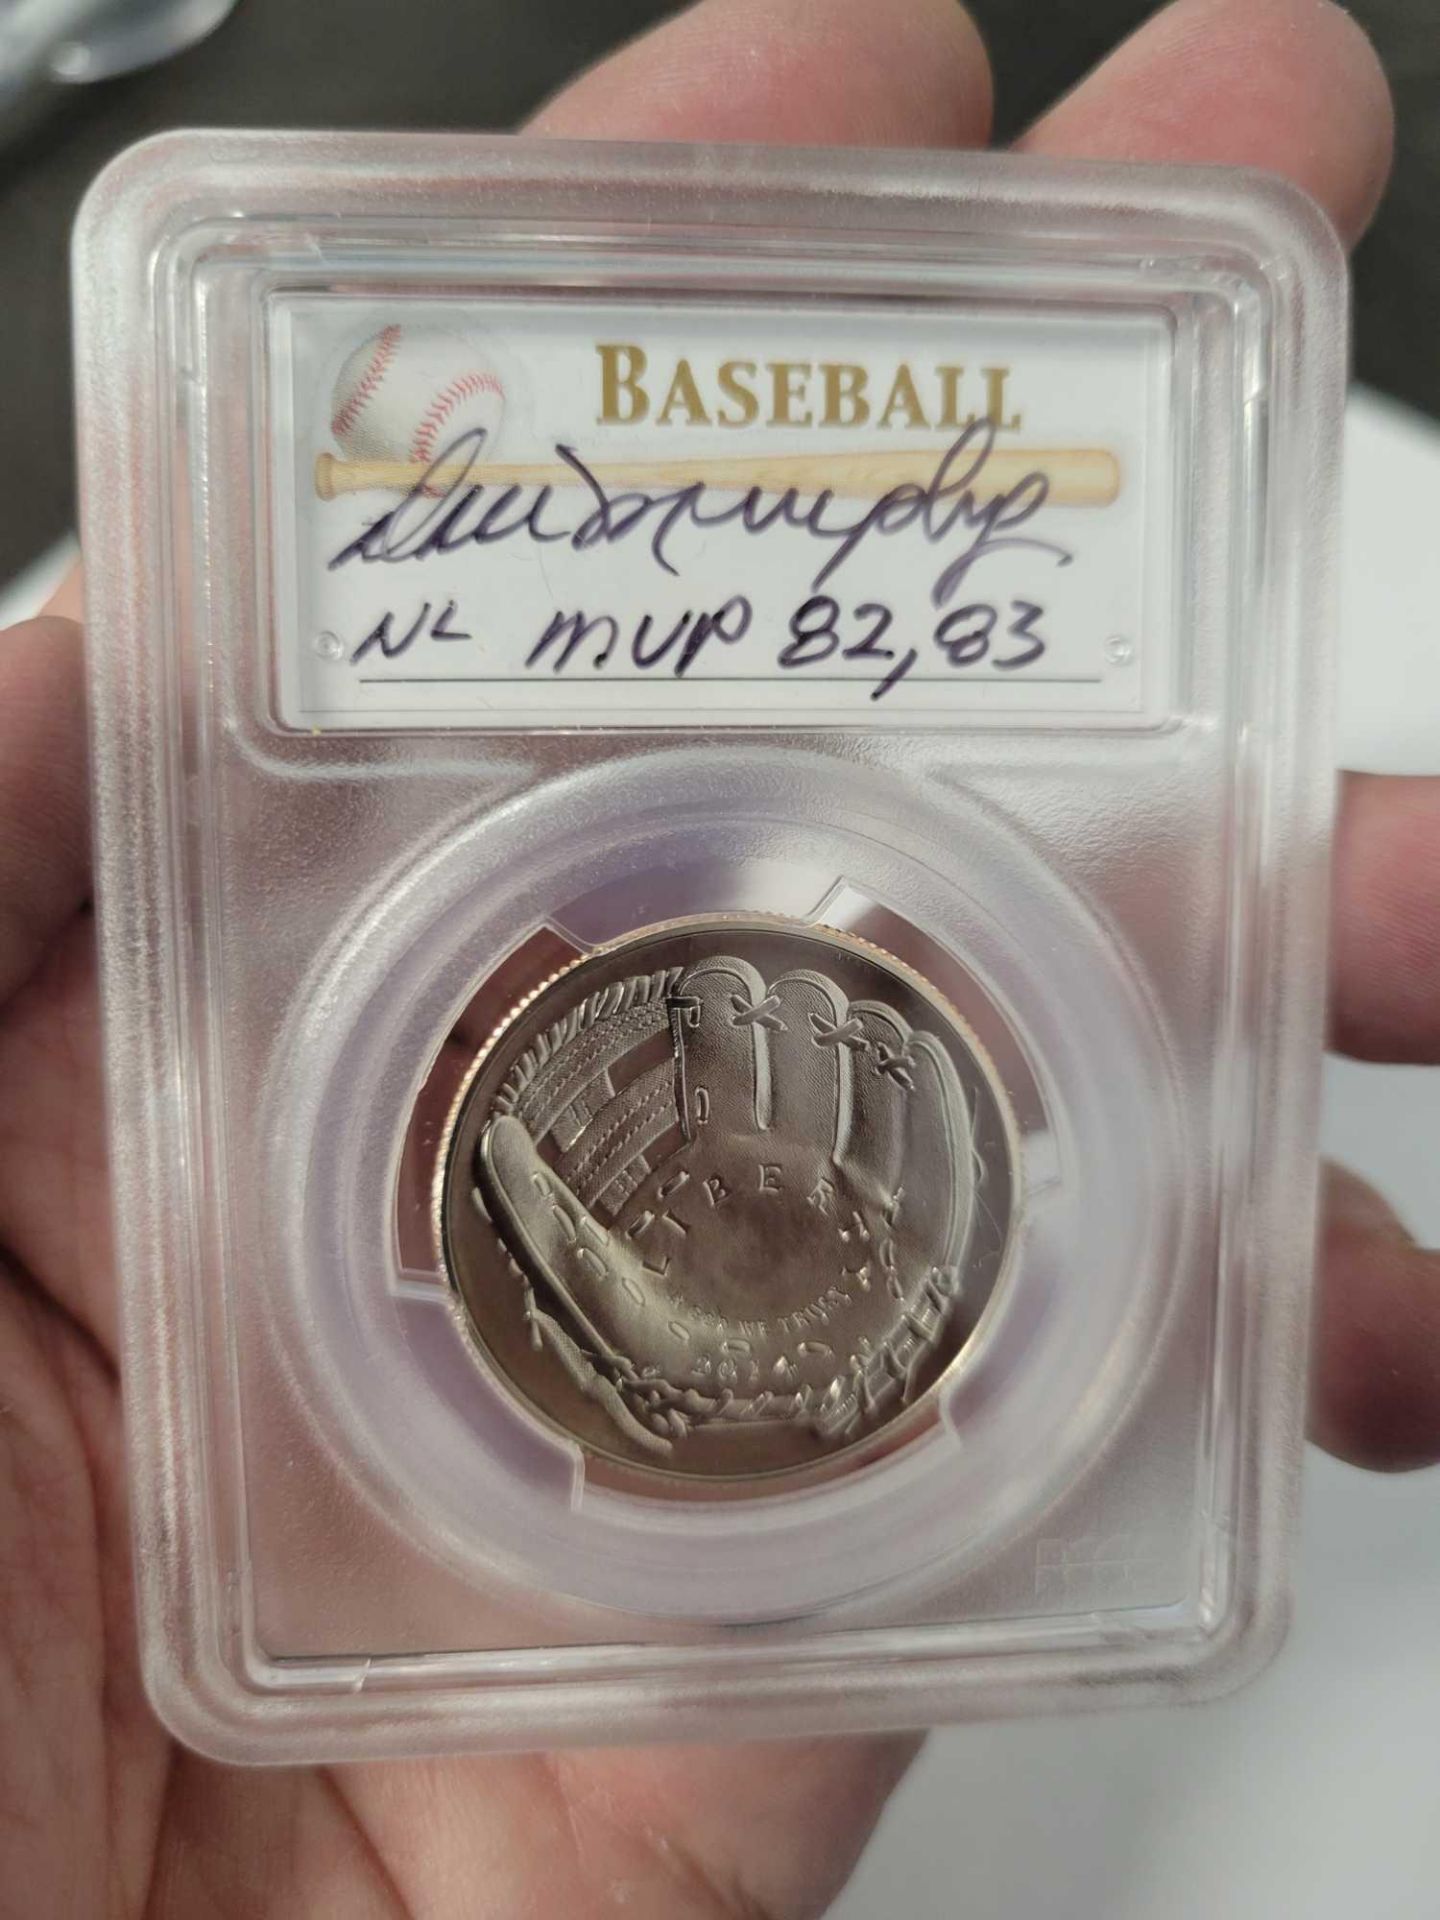 Dale Murphy signed baseball Silver Coin - Image 3 of 4